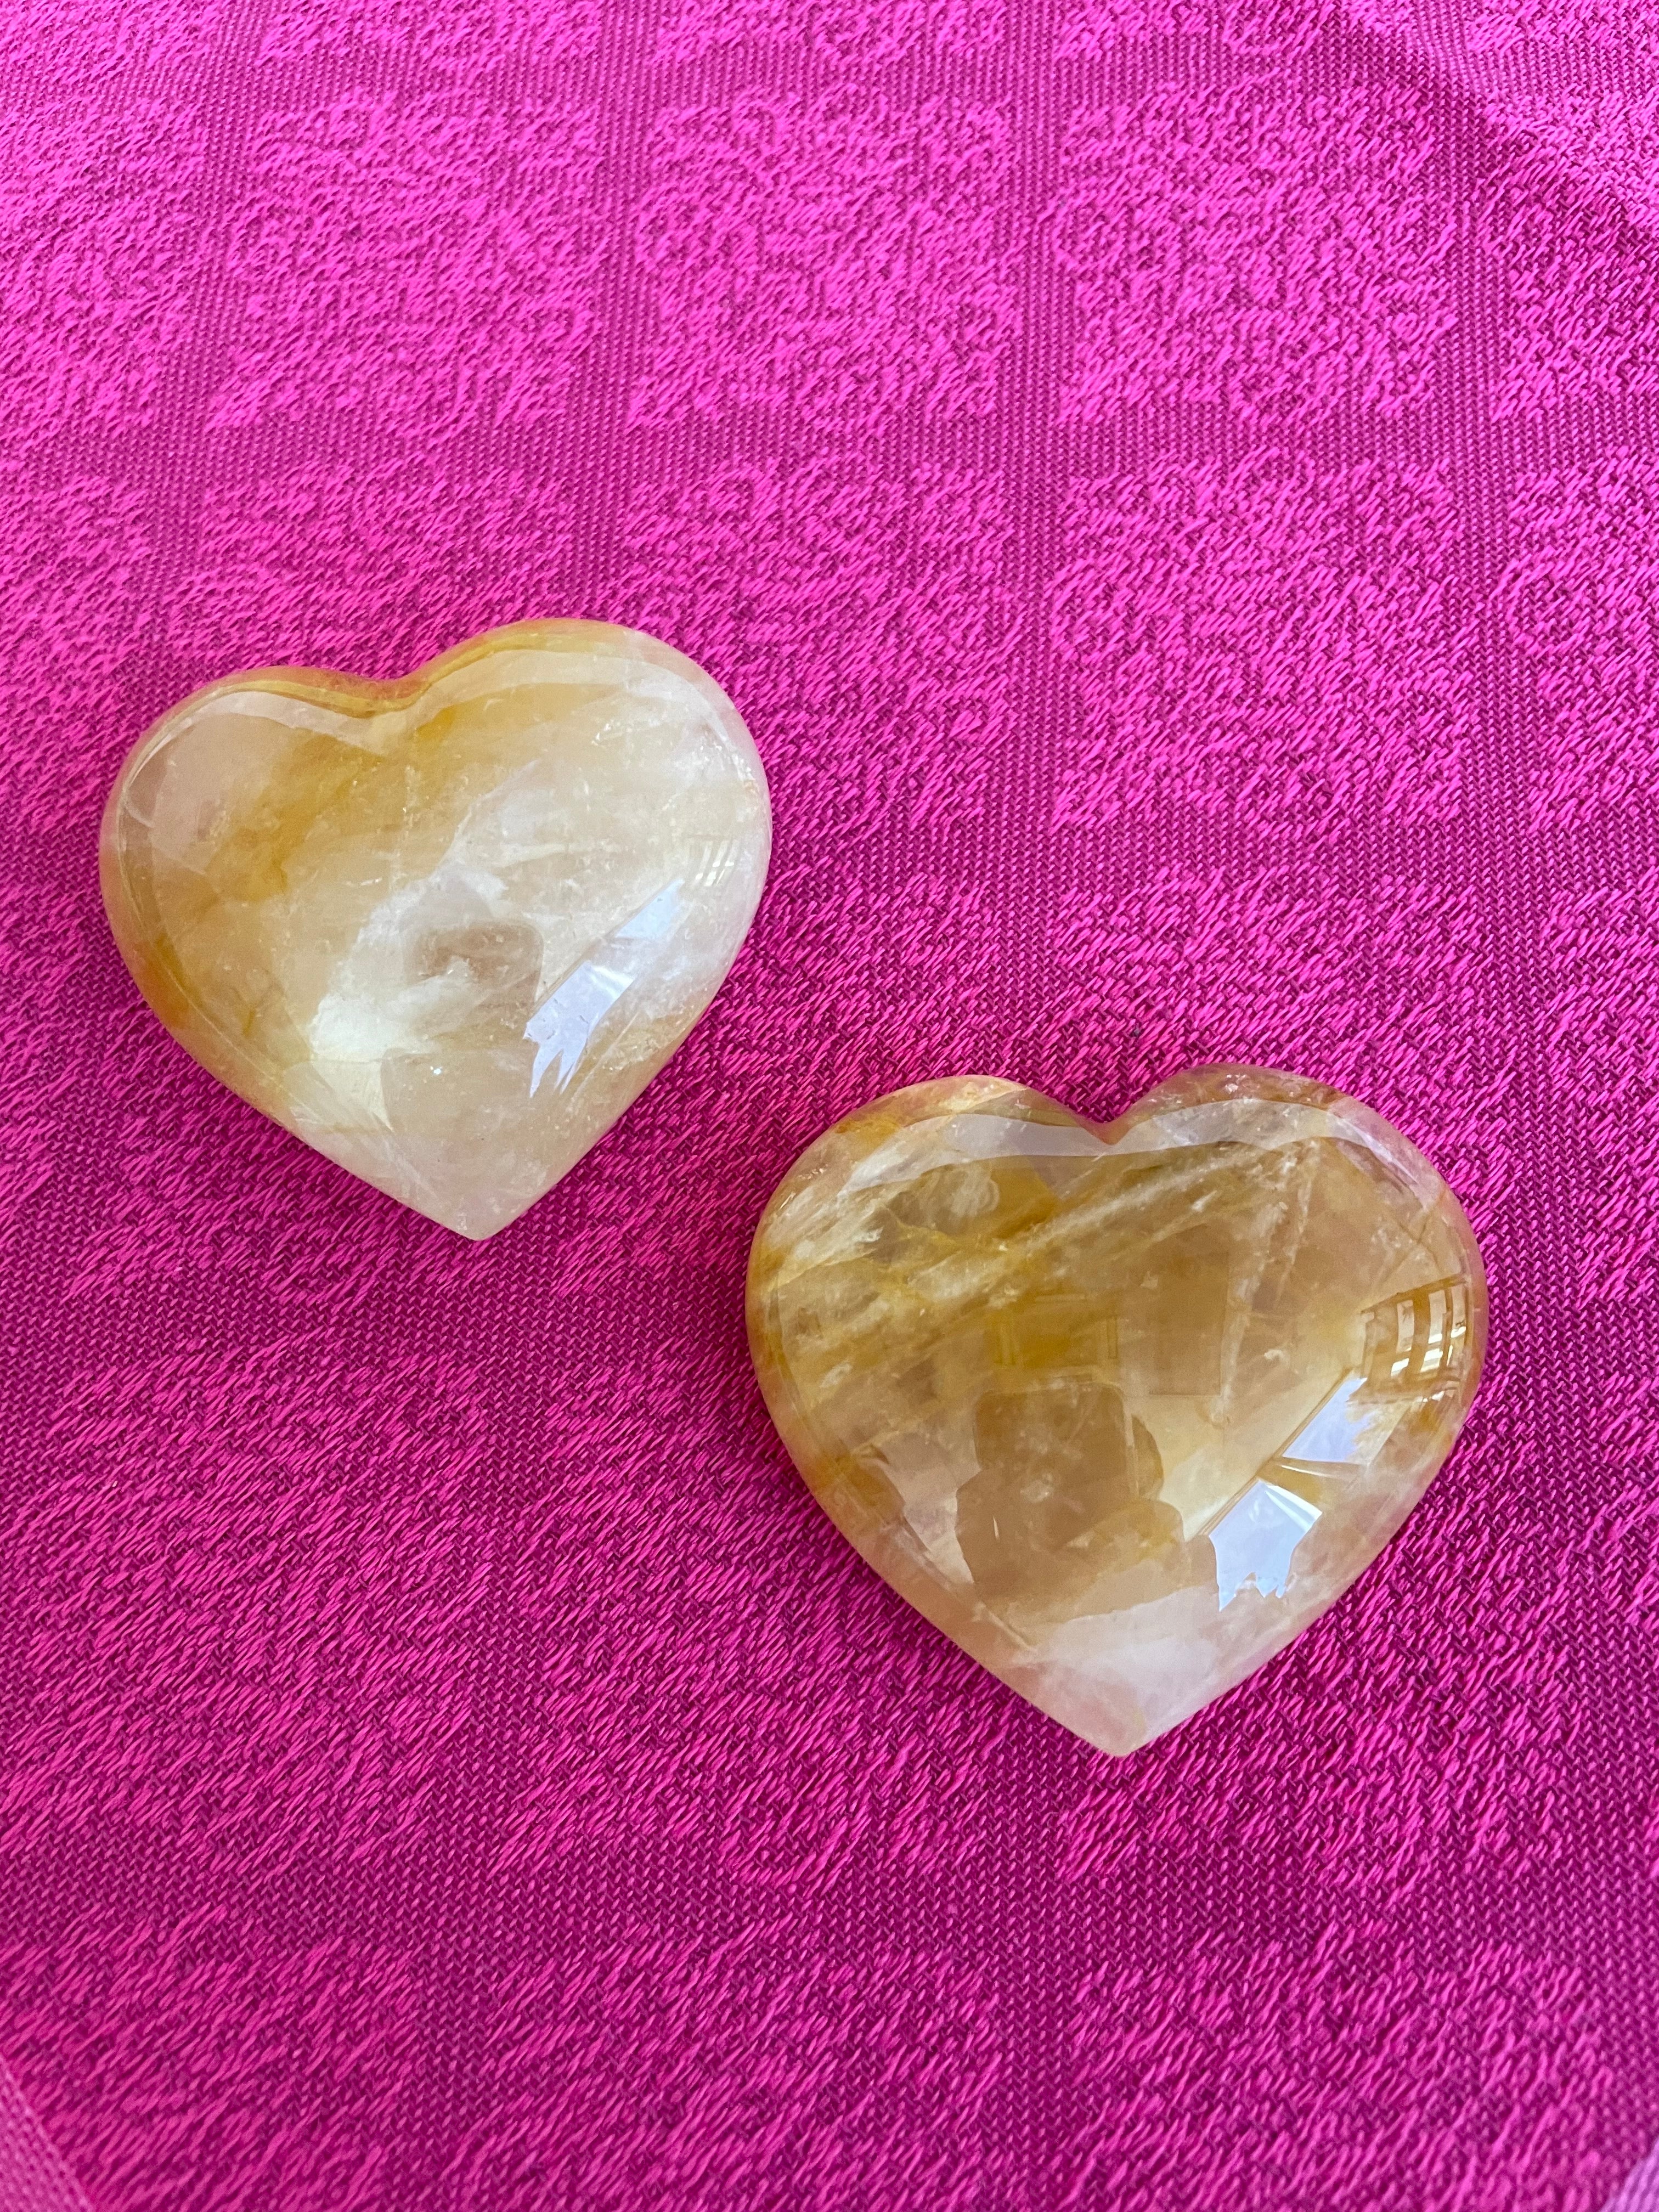 Alternate view. Beautiful citrine (yellow quartz) heart! Great to place on your altar or bookshelf, to hold during meditation, to use for healing or as a décor item in your home of office. Citrine absorbs and dispels negative energy, is a stone of abundance - attracting money, prosperity and success, warming & energizing, enhances creativity, brings a positive attitude, is cleansing and more. This citrine heart is approximately 2" at it's widest expanse. Cost is $24.